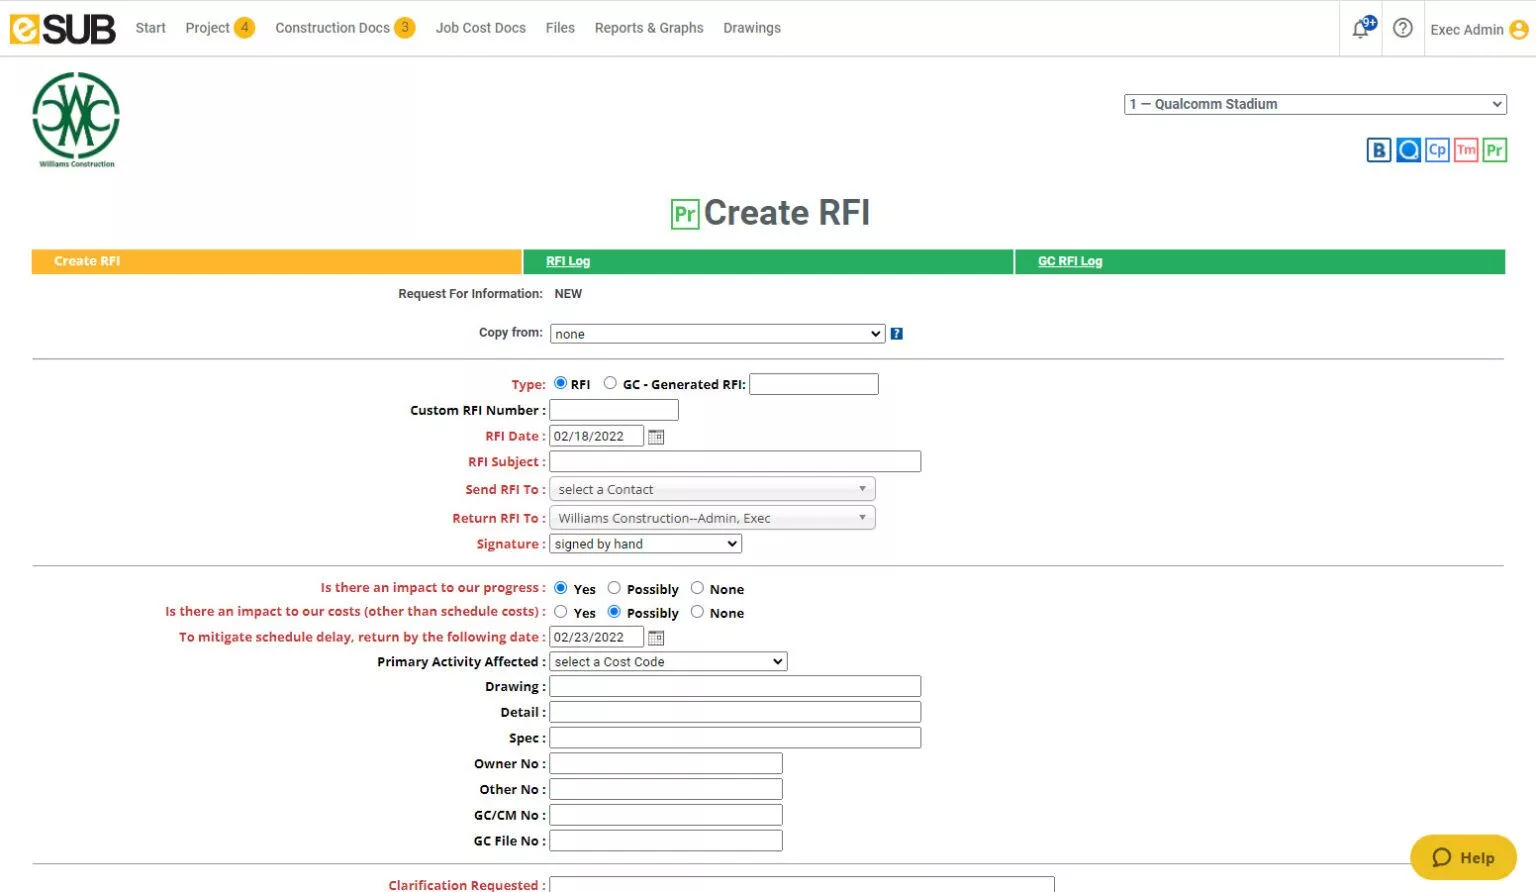 View on an RFI in the process of creating in eSUB project management application